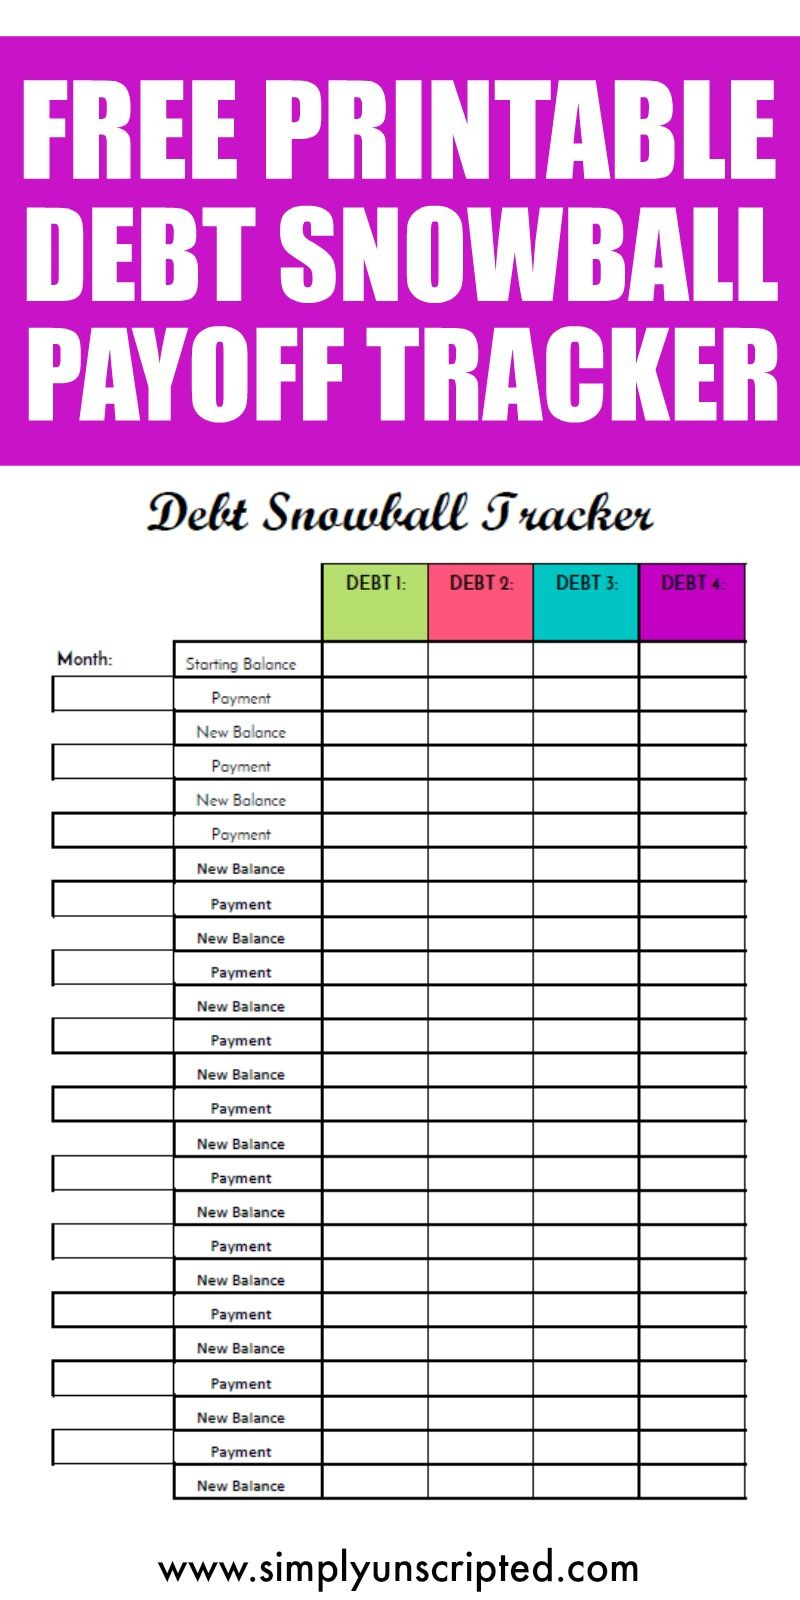 Free Debt Snowball Printable Worksheet: Track Your Debt Payoff | Free Printable Dave Ramsey Worksheets